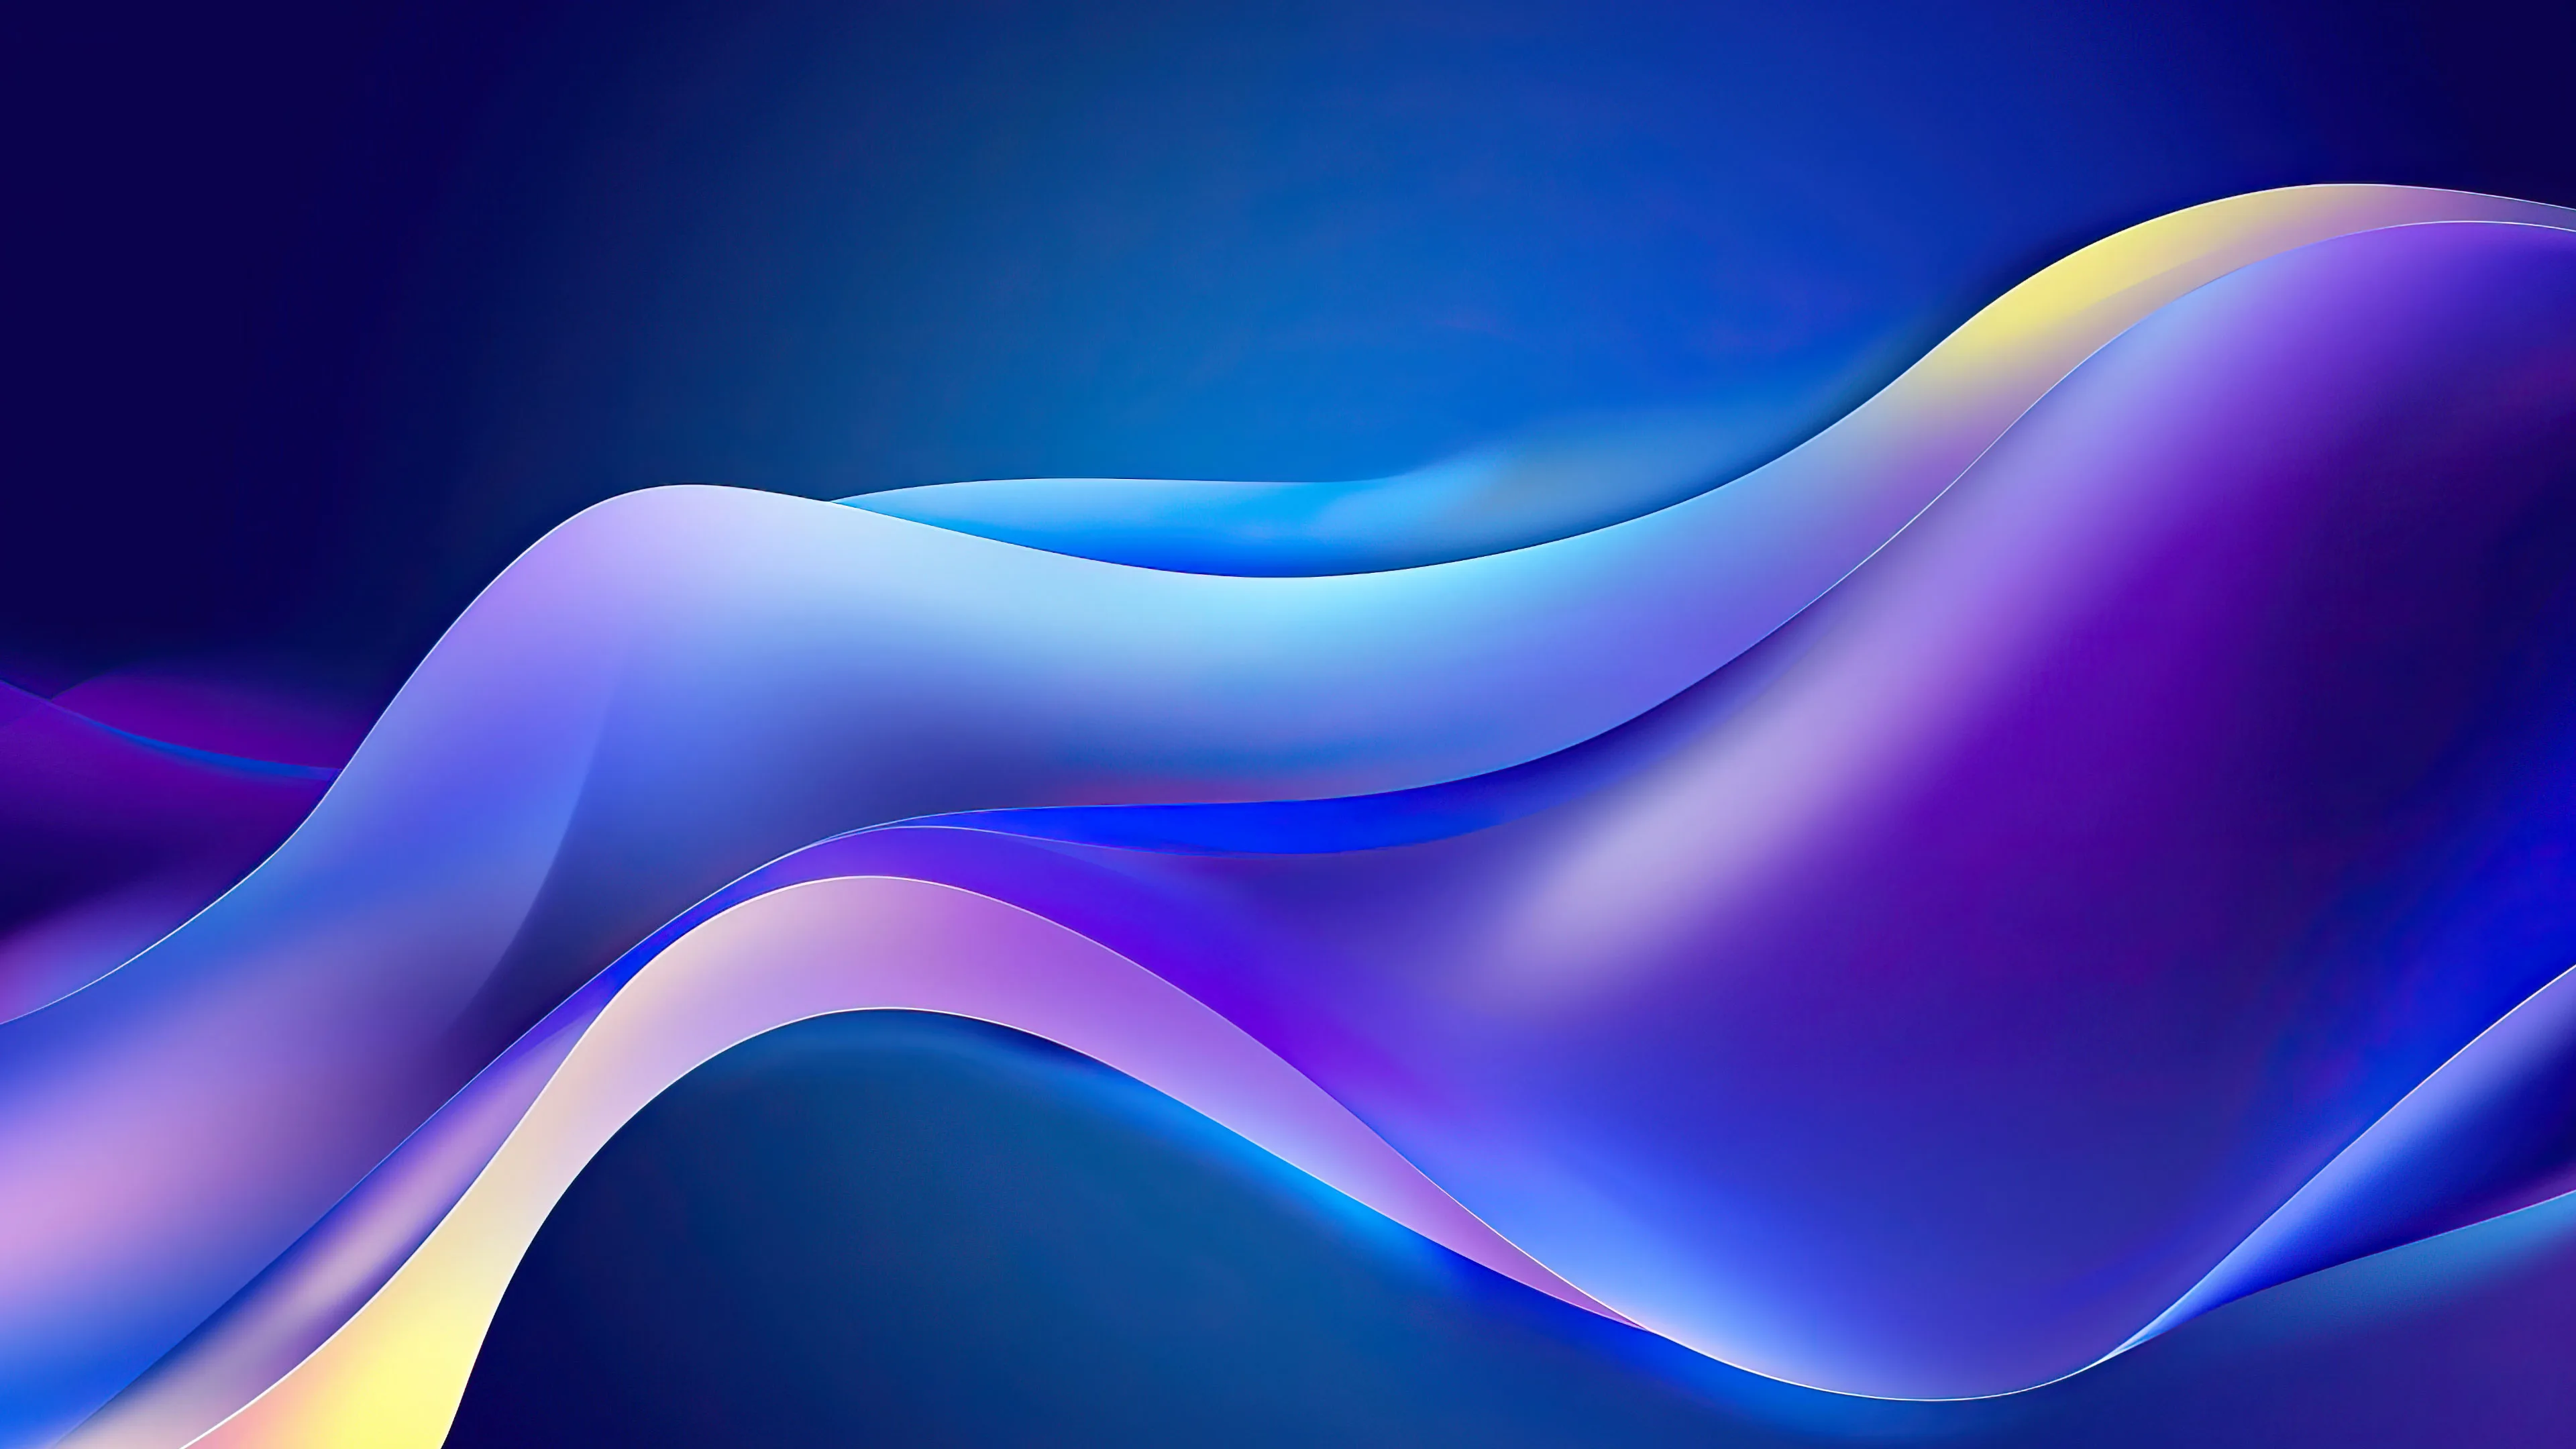 A vibrant 4K PC wallpaper featuring an electrifying wave of colors pulsating across the screen. This dynamic artwork captures the essence of motion and energy, making it a striking addition to your desktop background.